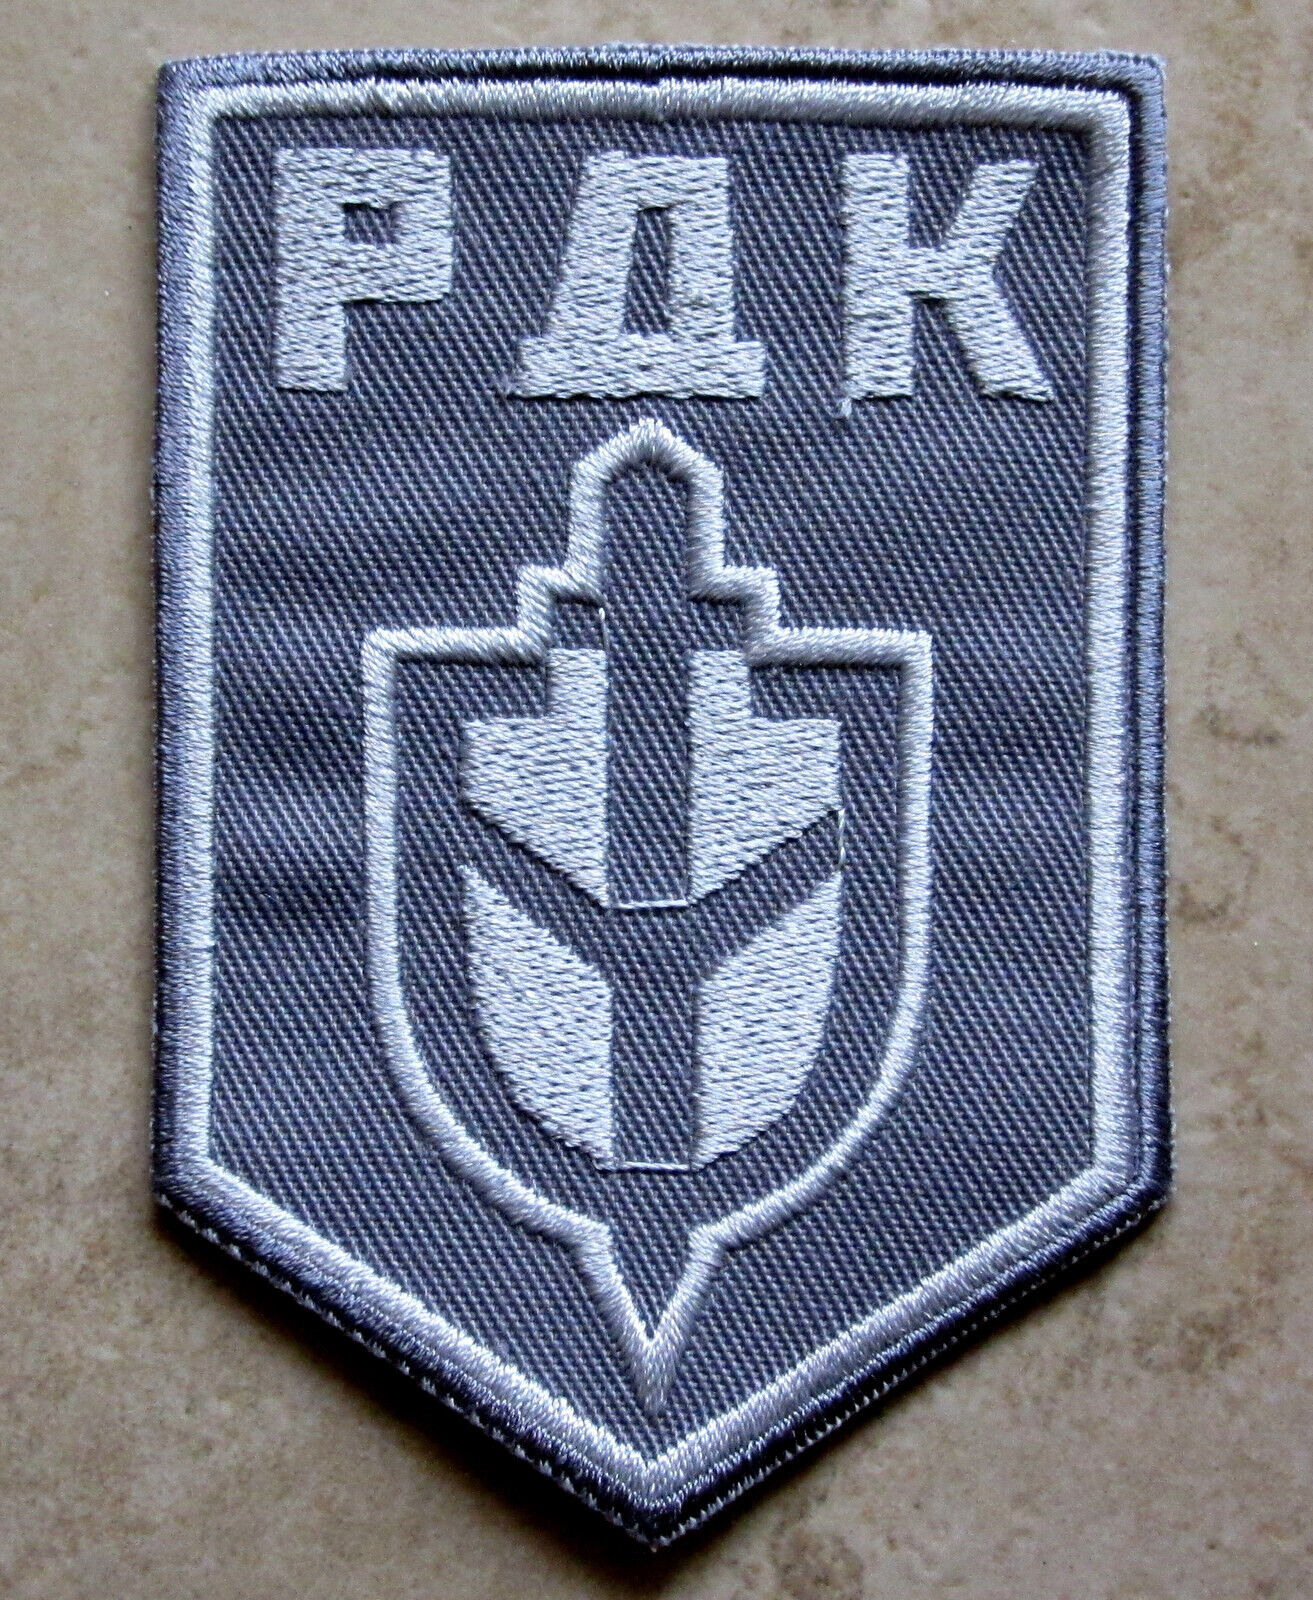 Russian Volunteer Corps ANTI-PUTIN MILITARY UNIT РДК CLOTH PATCH embroidered